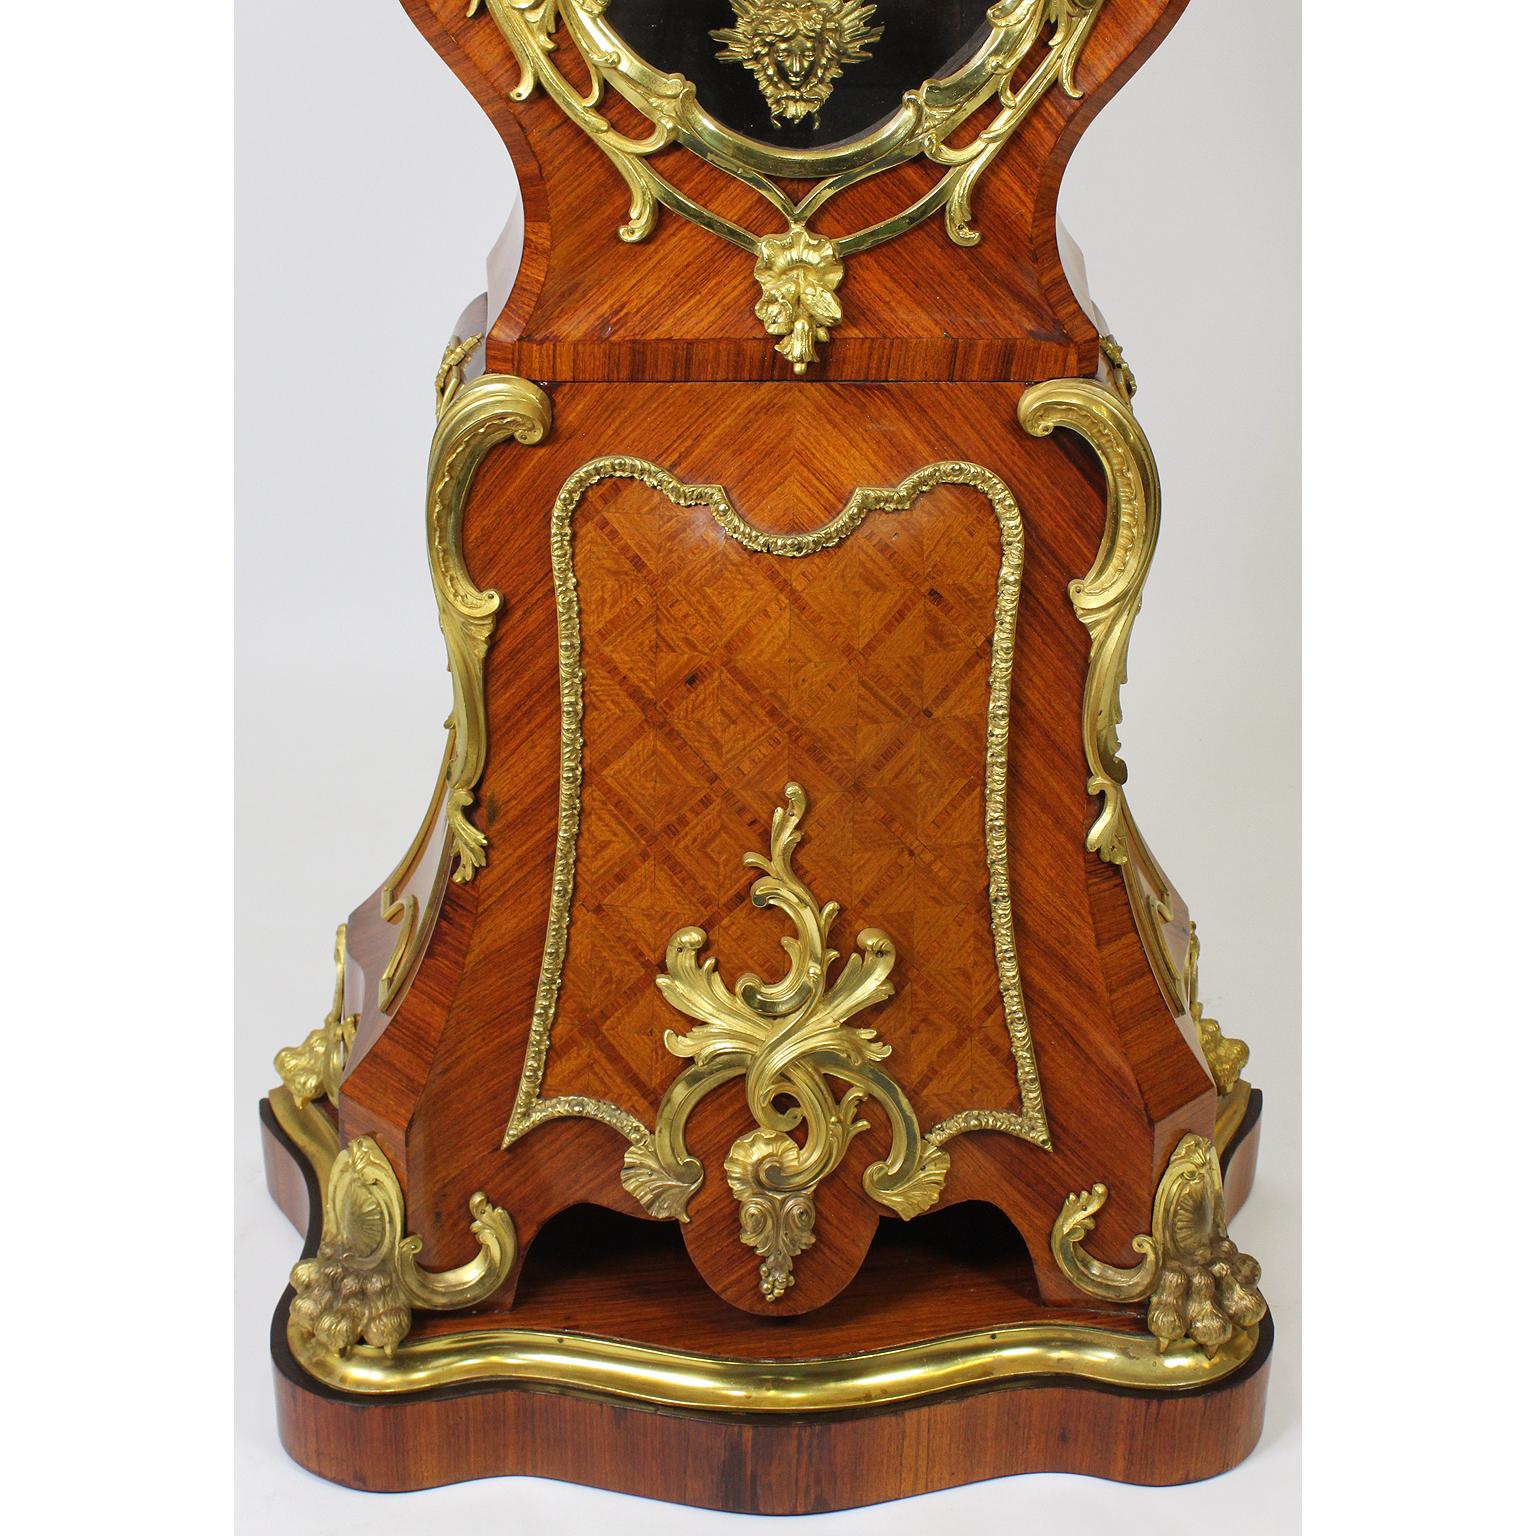 French 19th-20th Century Régence Style Gilt-Bronze Mounted Longcase Clock For Sale 5